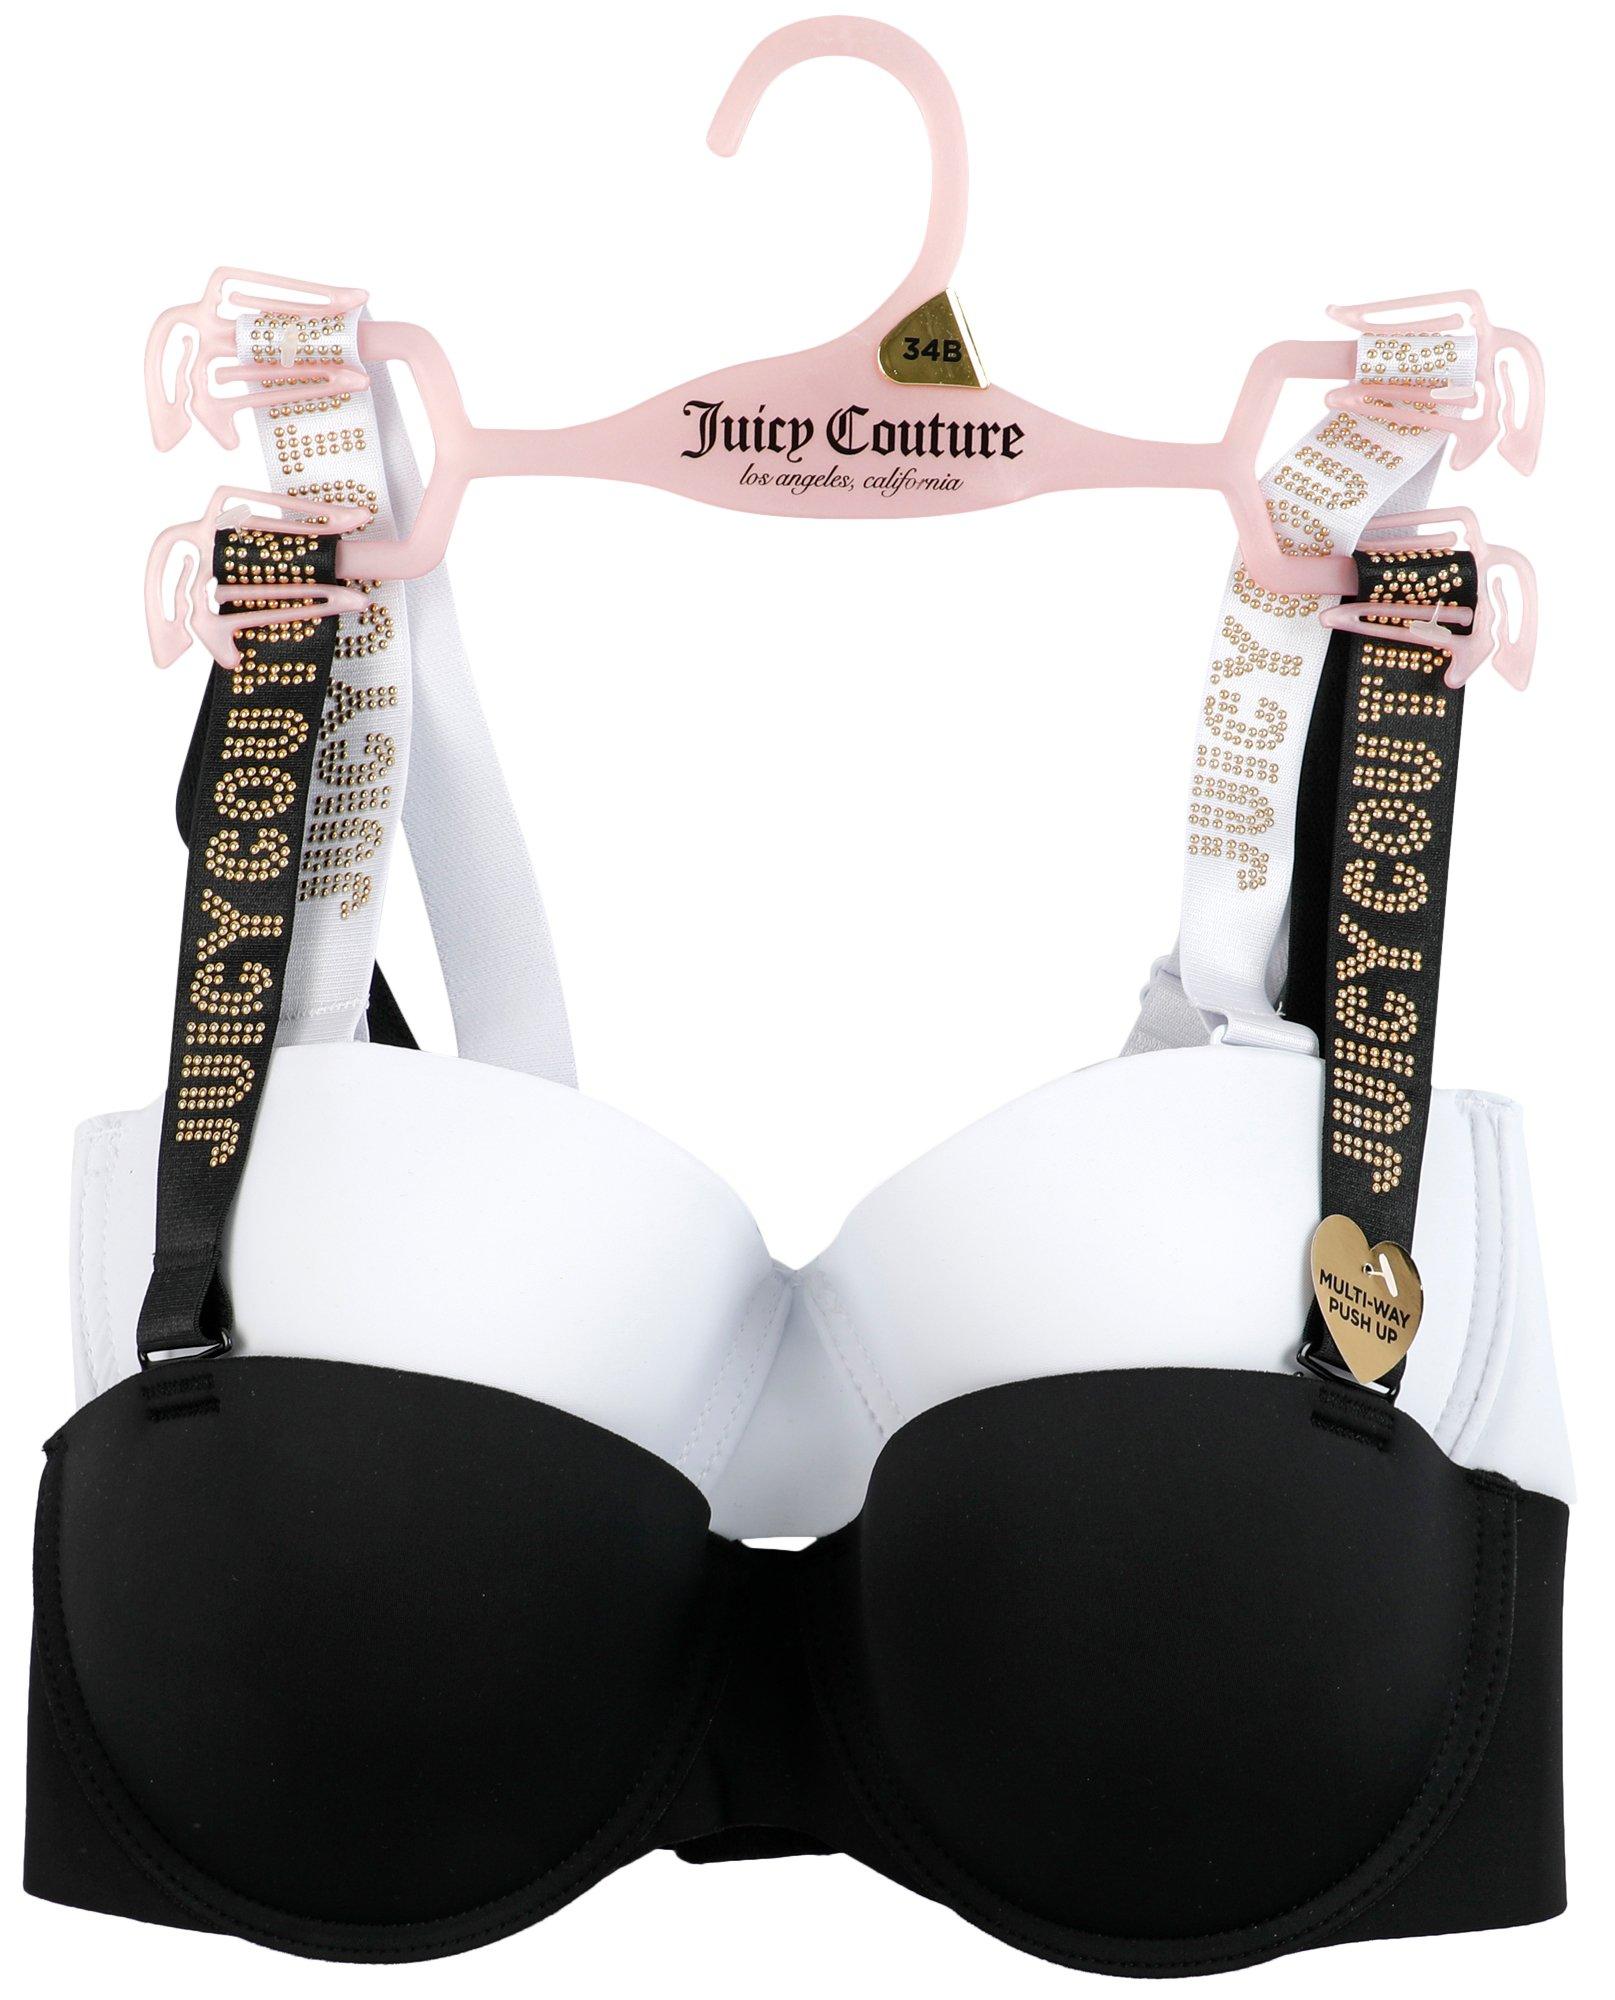 Juicy Couture, Intimates & Sleepwear, Juicy Couture Bra All Lace 42d